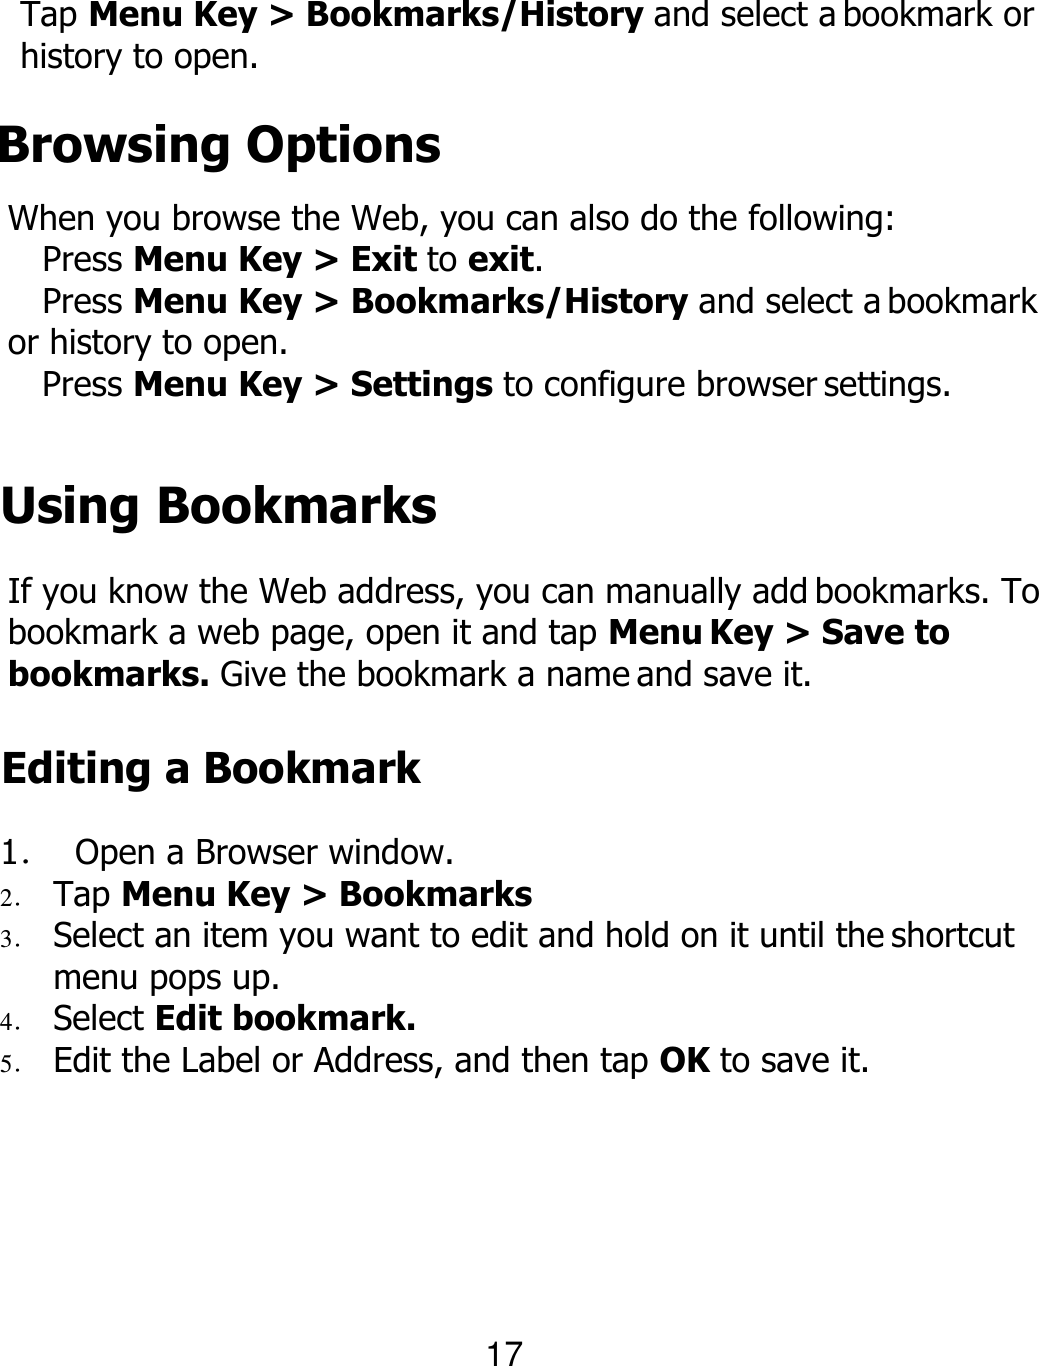 Tap Menu Key &gt; Bookmarks/History and select a bookmark or history to open. Browsing Options When you browse the Web, you can also do the following: Press Menu Key &gt; Exit to exit. Press Menu Key &gt; Bookmarks/History and select a bookmark or history to open. Press Menu Key &gt; Settings to configure browser settings.  Using Bookmarks If you know the Web address, you can manually add bookmarks. To bookmark a web page, open it and tap Menu Key &gt; Save to bookmarks. Give the bookmark a name and save it. Editing a Bookmark 1． Open a Browser window. 2． Tap Menu Key &gt; Bookmarks 3． Select an item you want to edit and hold on it until the shortcut menu pops up. 4． Select Edit bookmark. 5． Edit the Label or Address, and then tap OK to save it. 17 